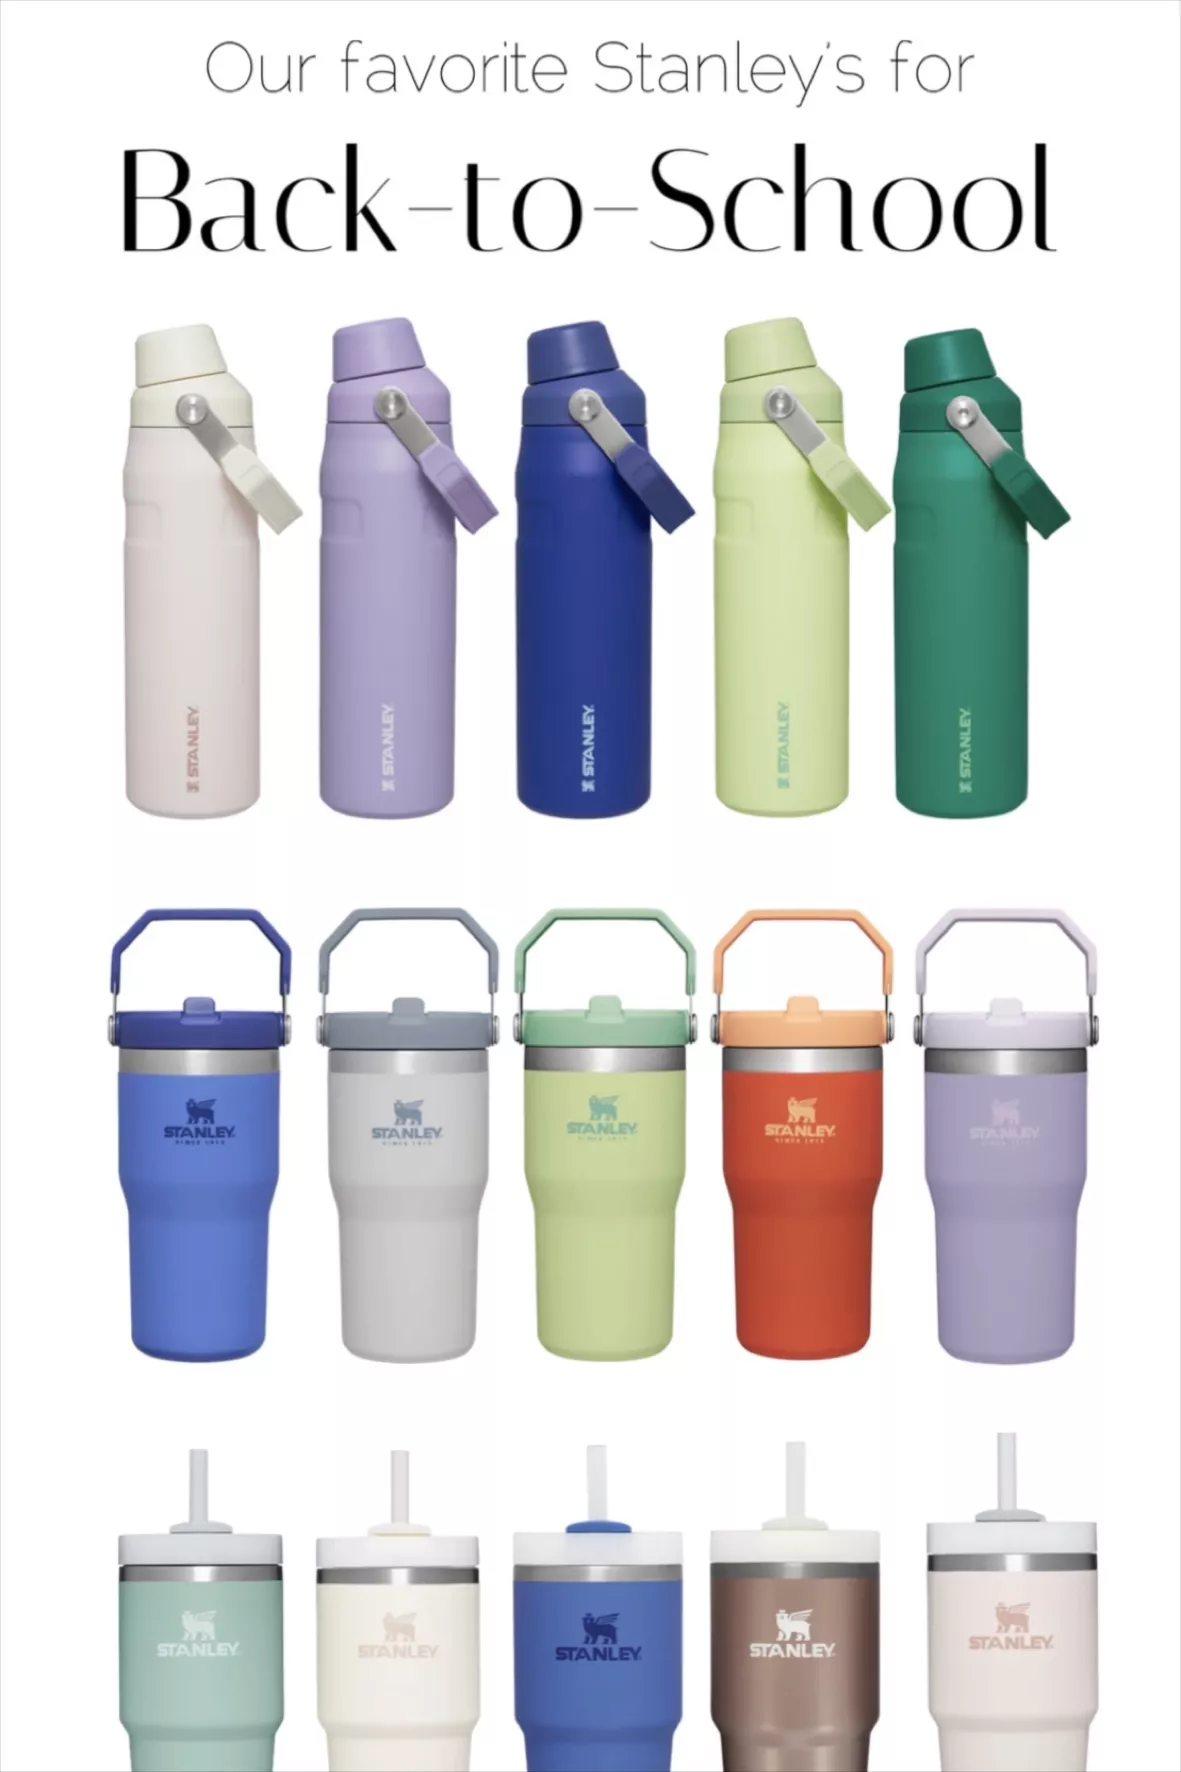 IceFlow, Insulated Water Bottles, Jugs & Tumblers